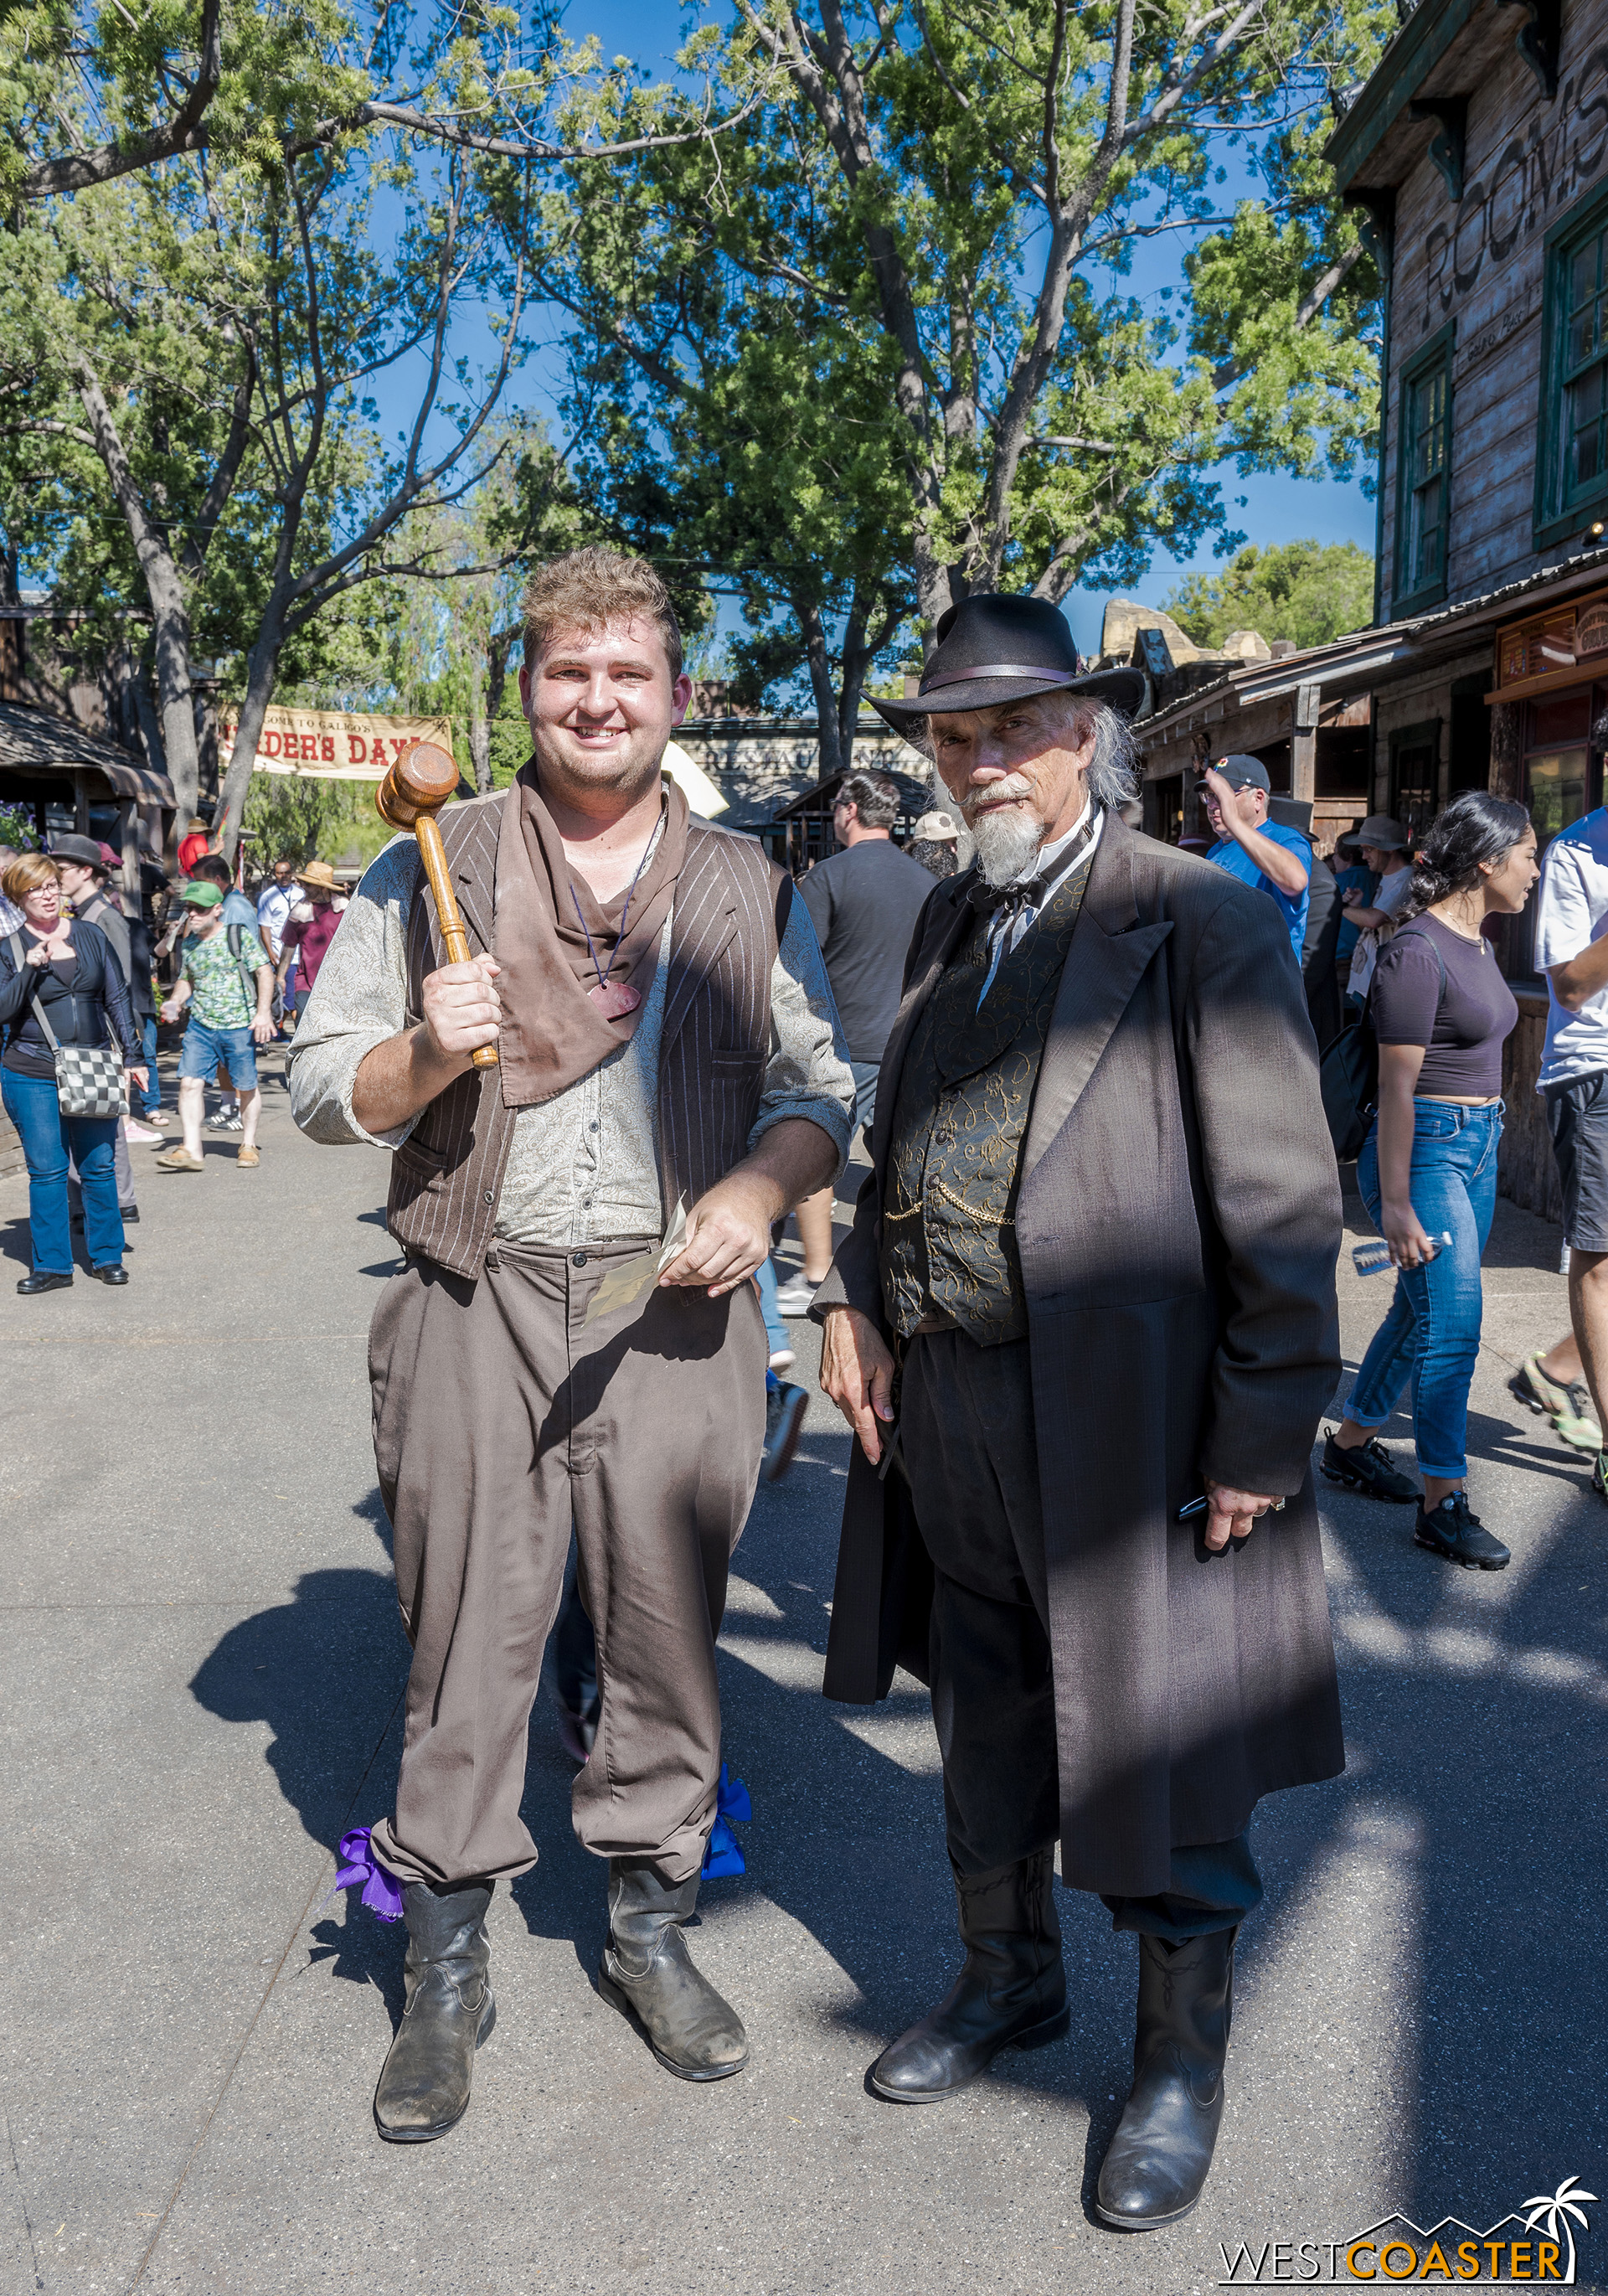  Emery Mund (left) still causes unintentional trouble and confusion.  He’s quite a contrast to the gruff, serious, but internally caring Judge Roy Bean. 